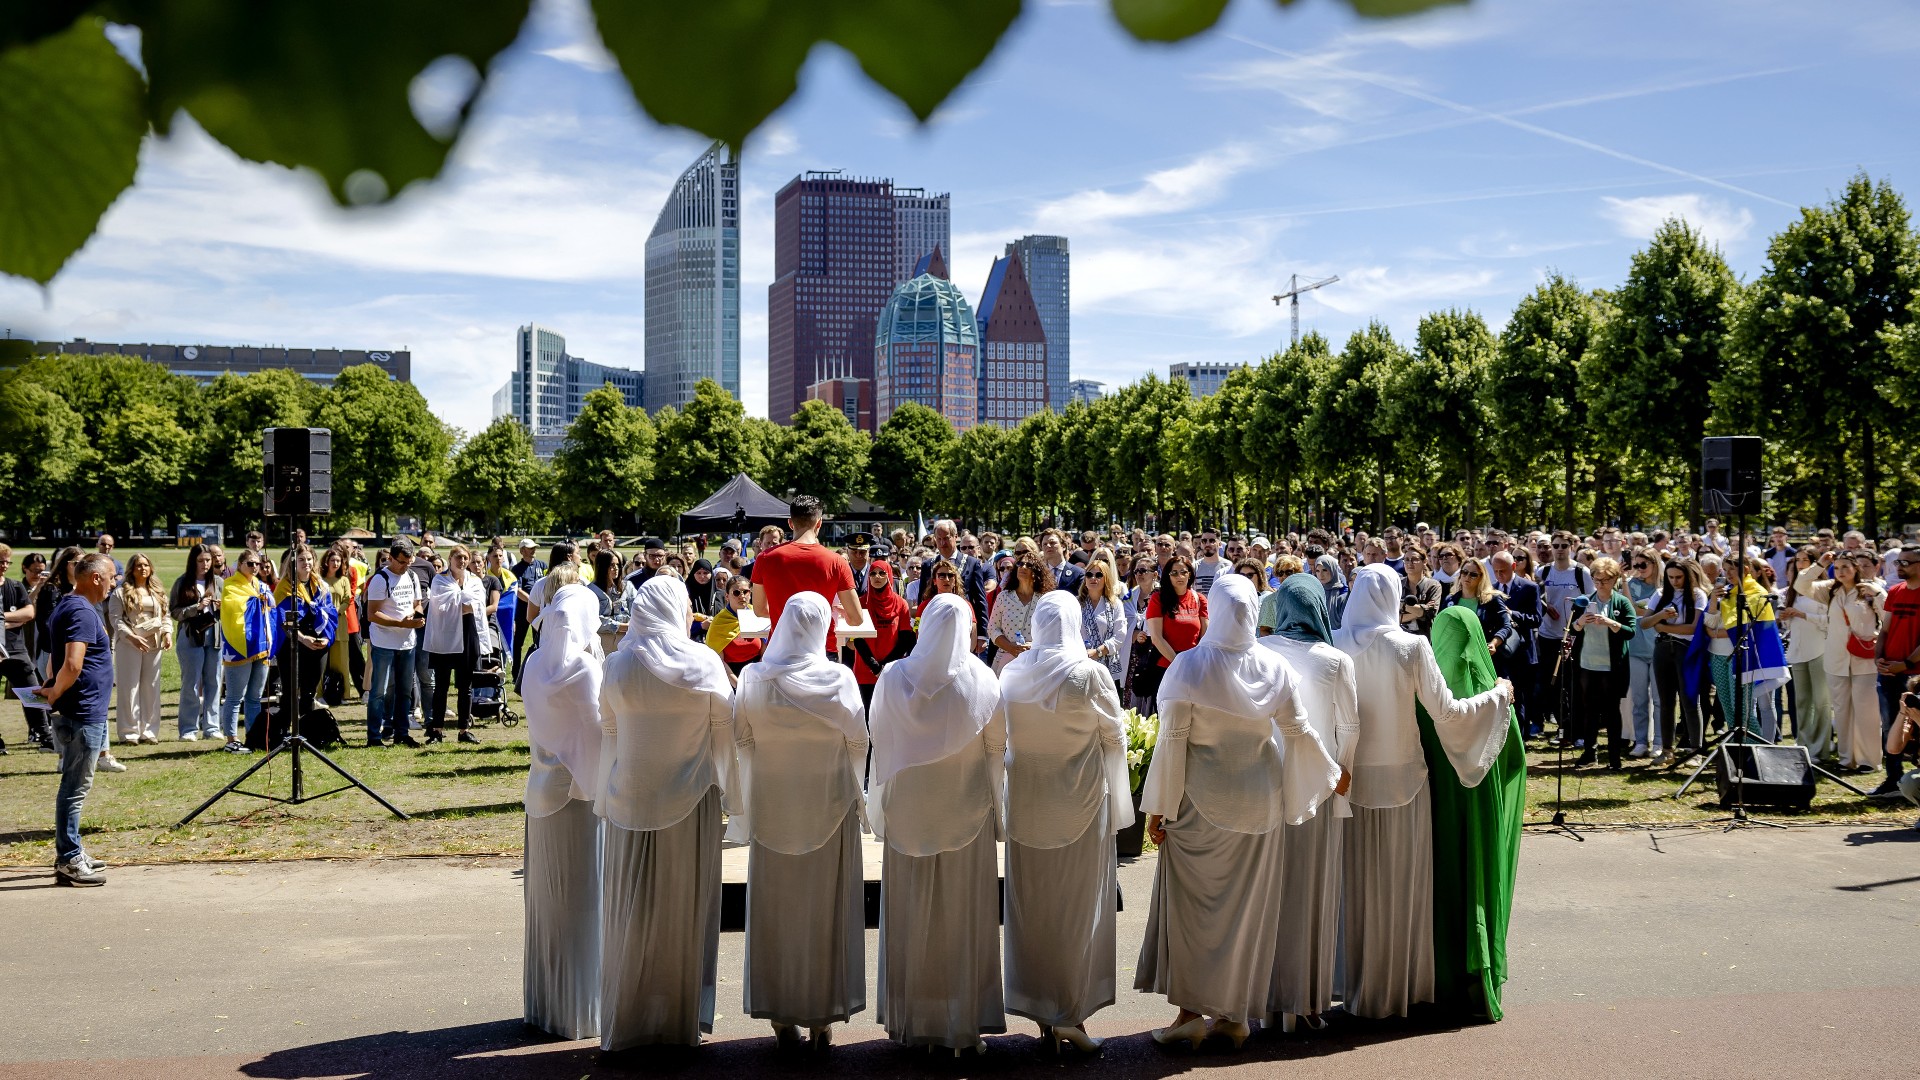 Participants attend an annual remembrance ceremony of the Srebrenica massacre, where Bosnian Serb troops murdered more than 8,000 Muslim men and boys after the fall of an enclave guarded by the Dutch in 1995, on the Malieveld, in The Hague, on July 11, 2022